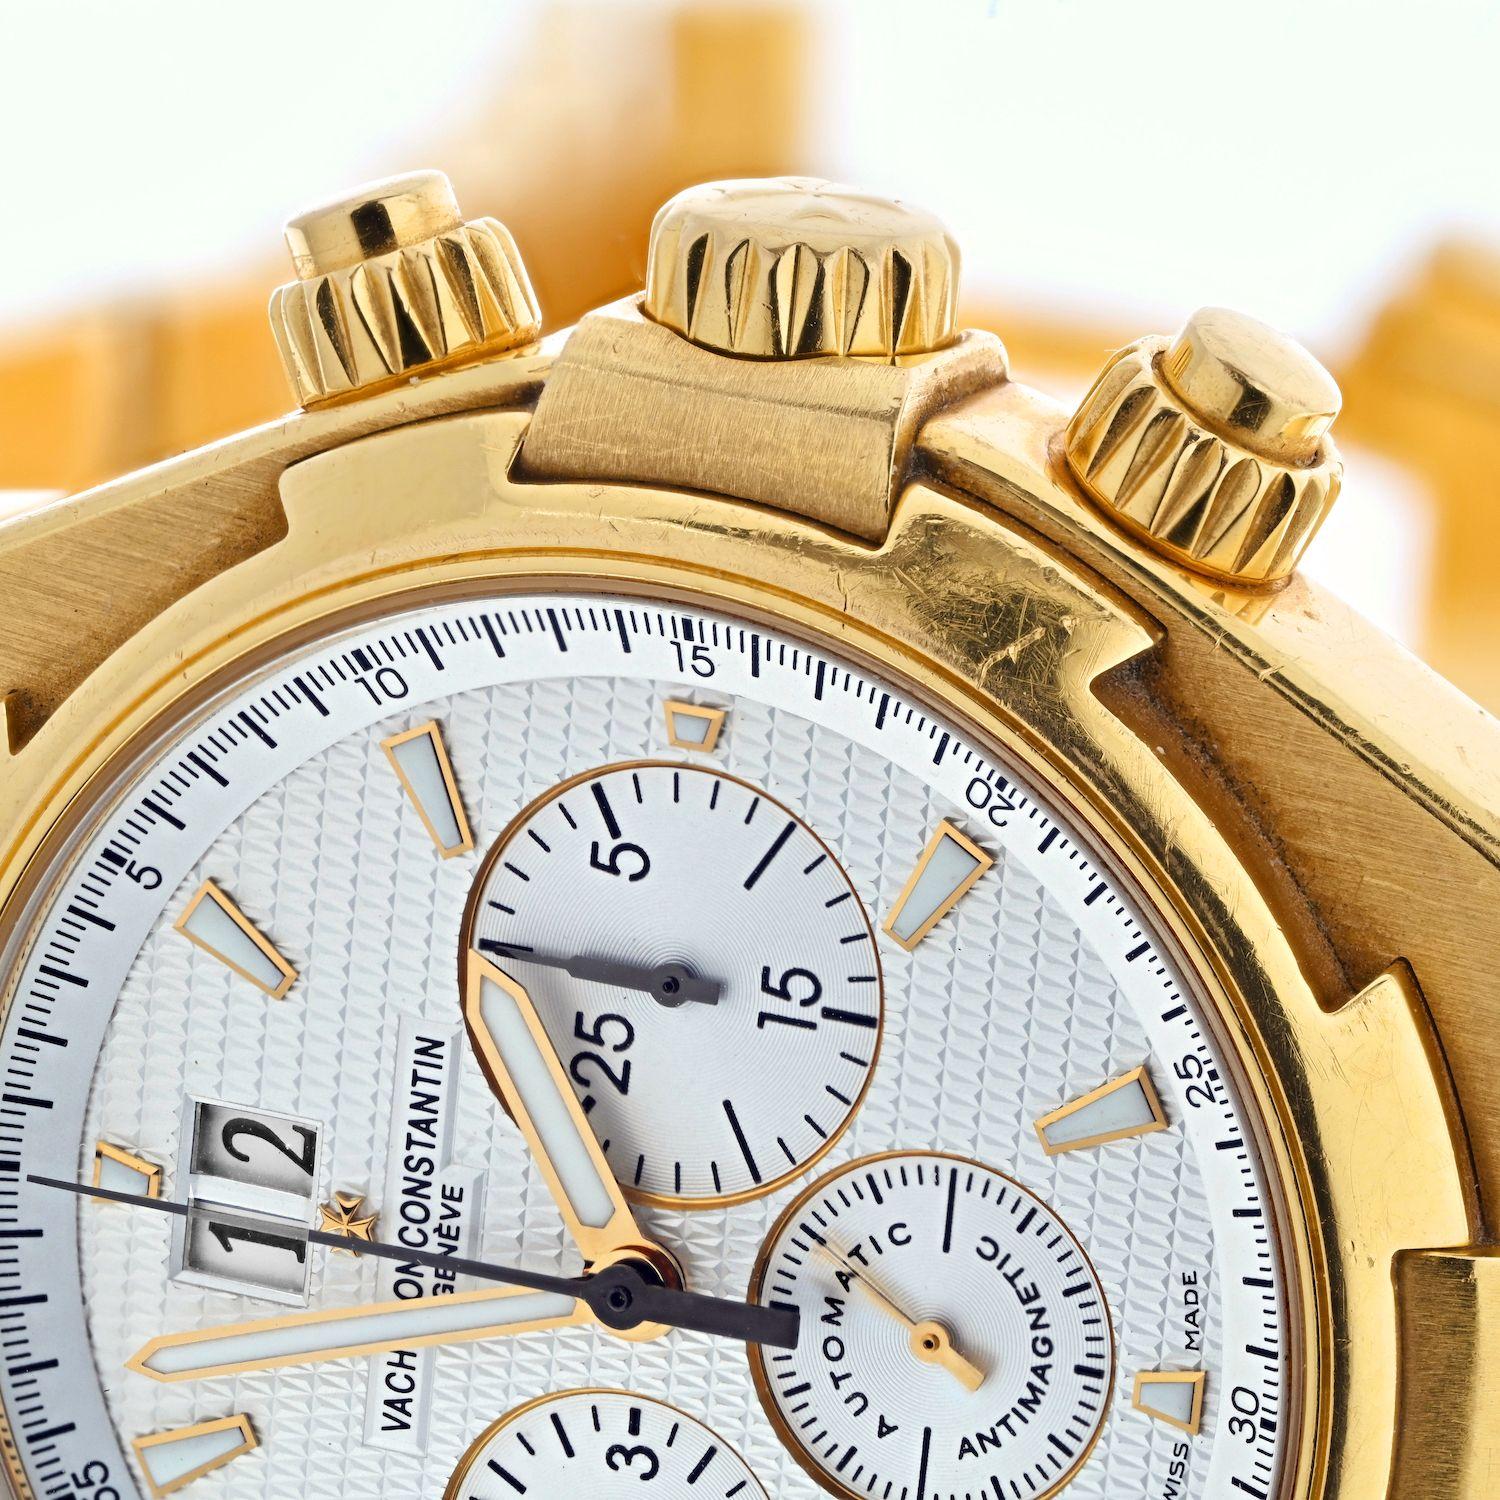 Pre-owned Vacheron Constantin 18K Yellow Gold Overseas Chronograph Mens Watch.
This youthful and sporty self - winding automatic watch, features a 44mm 18k yellow gold case surrounding a silver dial on an 18k yellow gold bracelet with folding